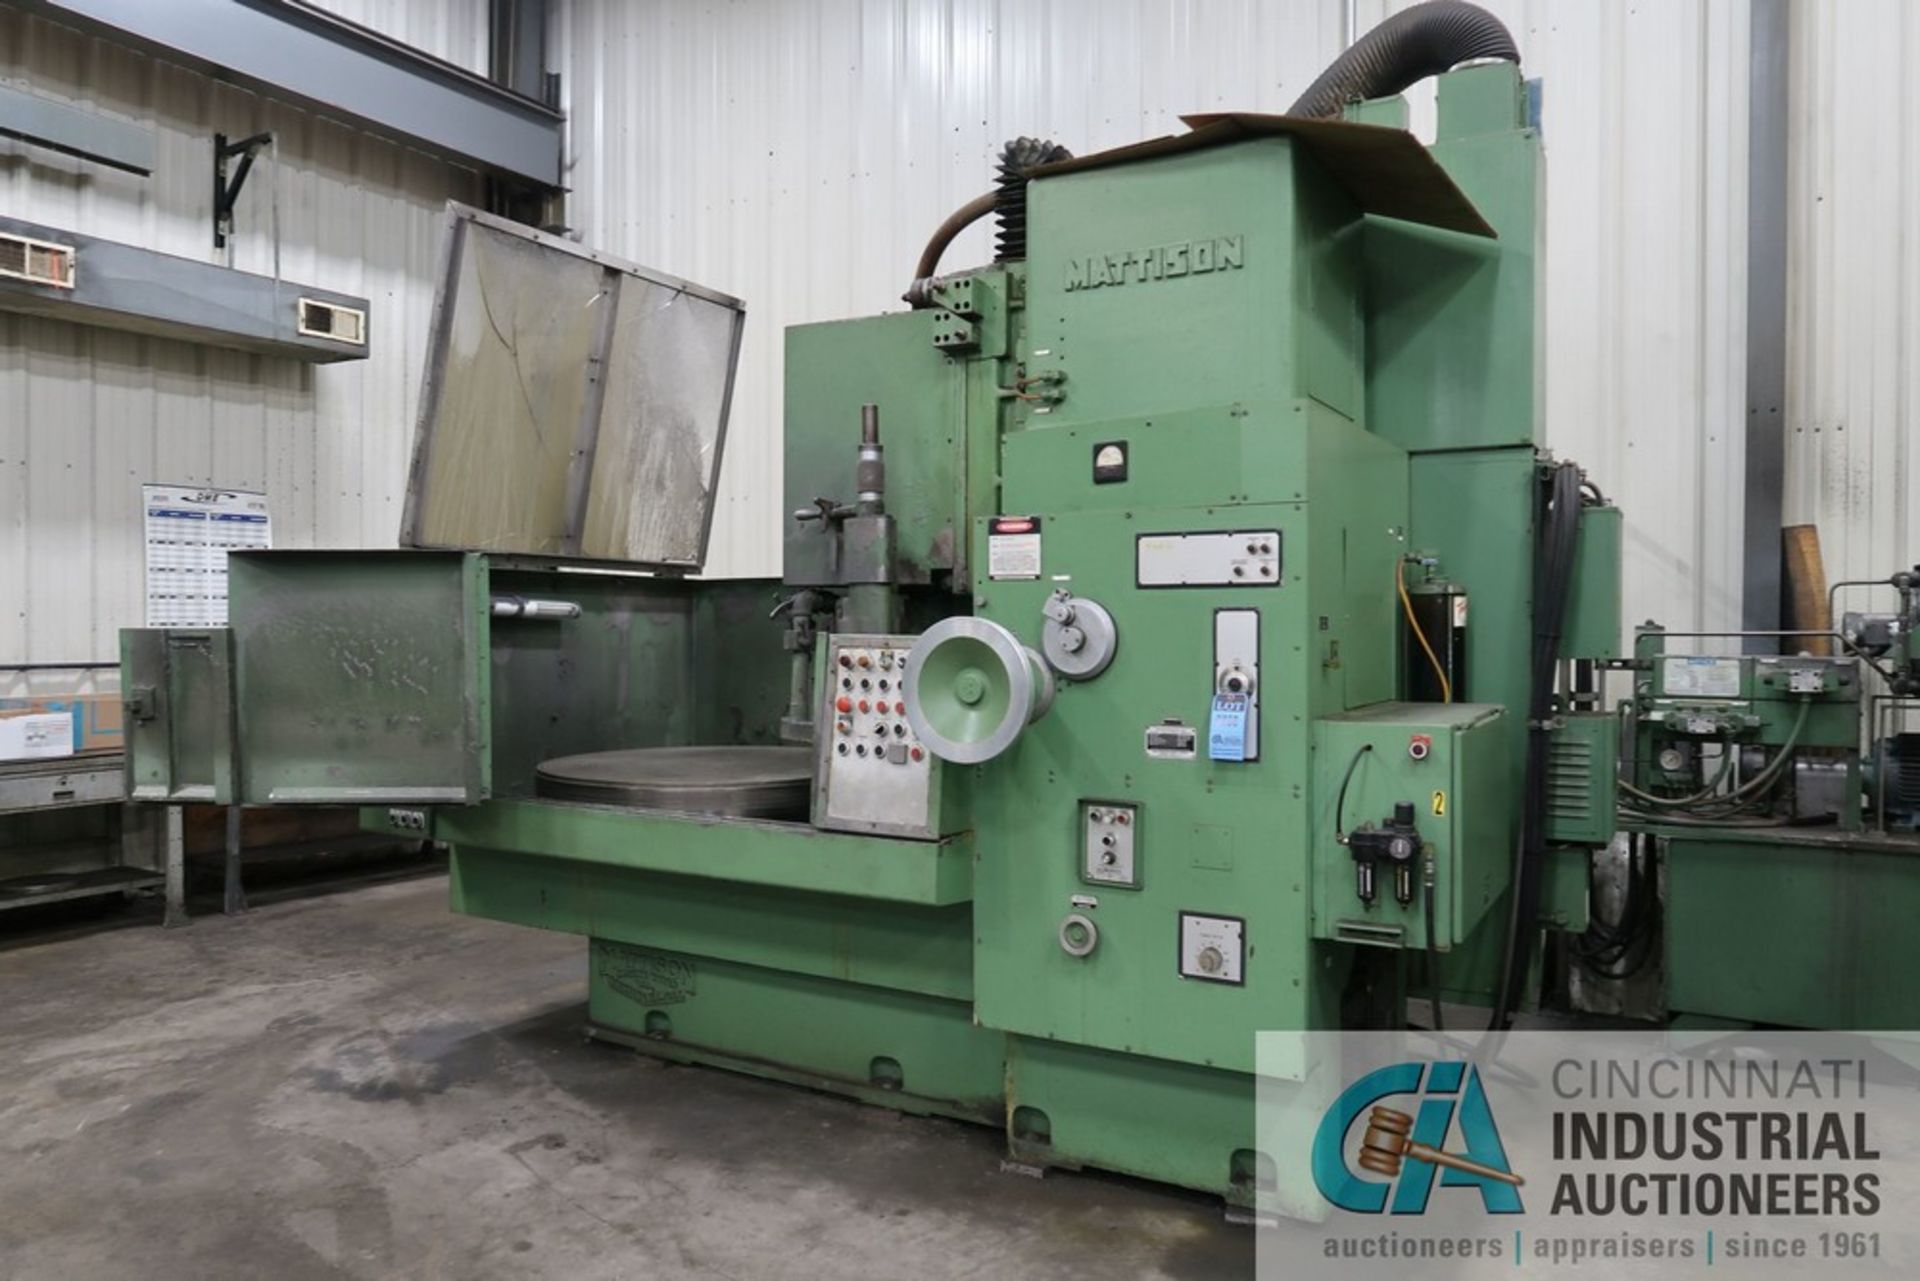 48" DIAMETER MATTISON ROTARY TABLE SURFACE GRINDER; S/N 24-799, 75 HP MOTOR, COOLANT FILTRATION,